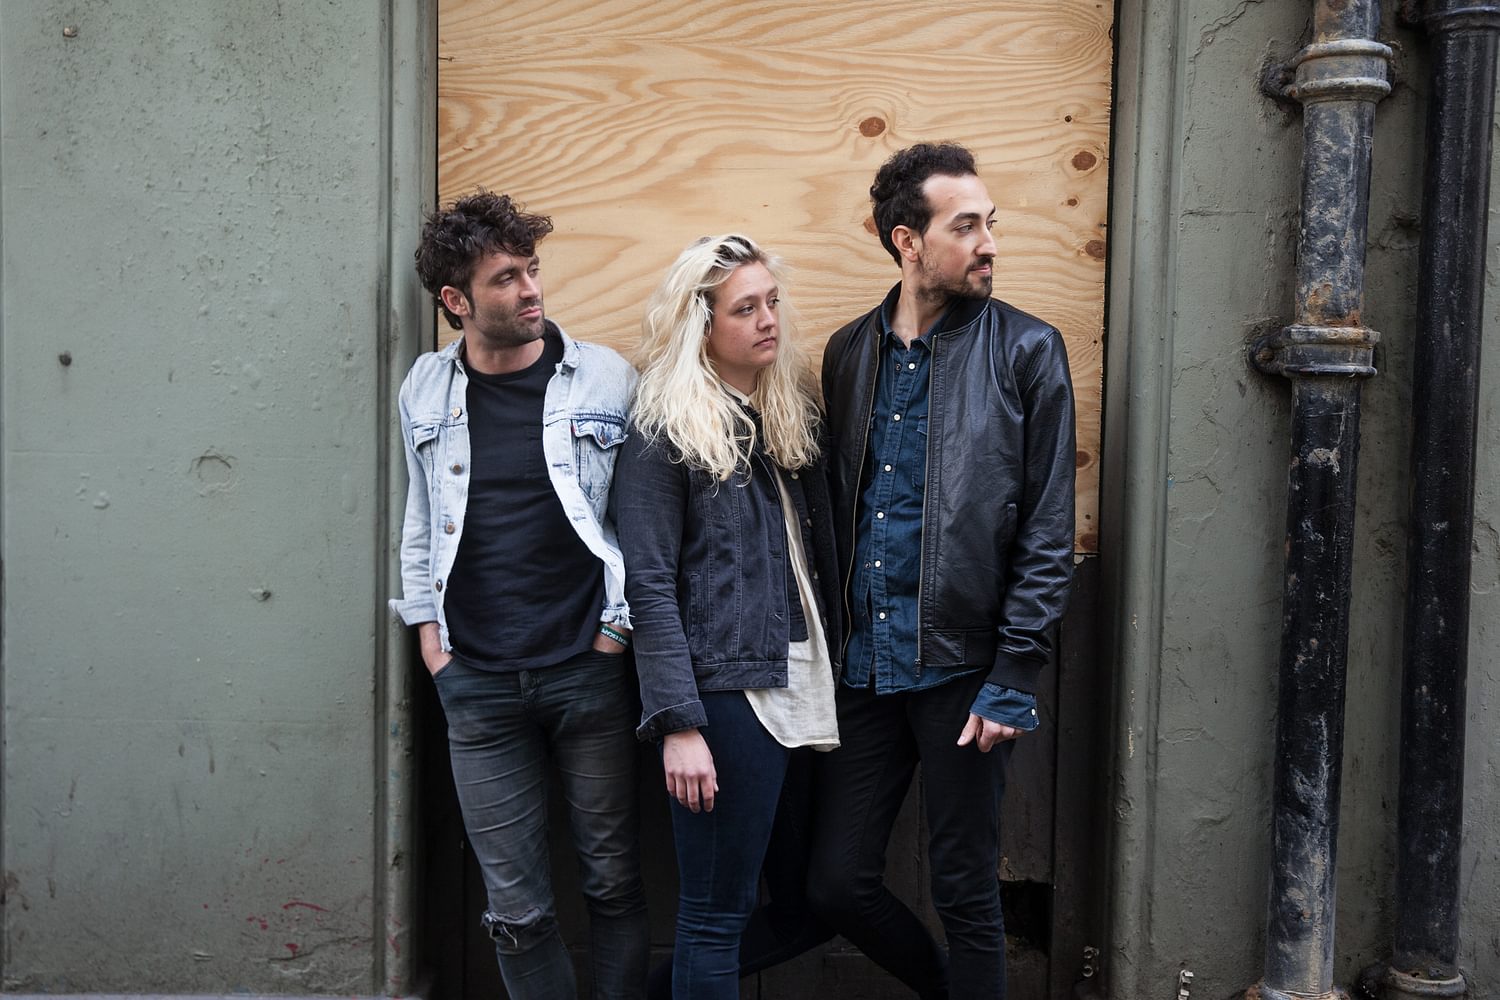 All We Are to support London Grammar on European tour